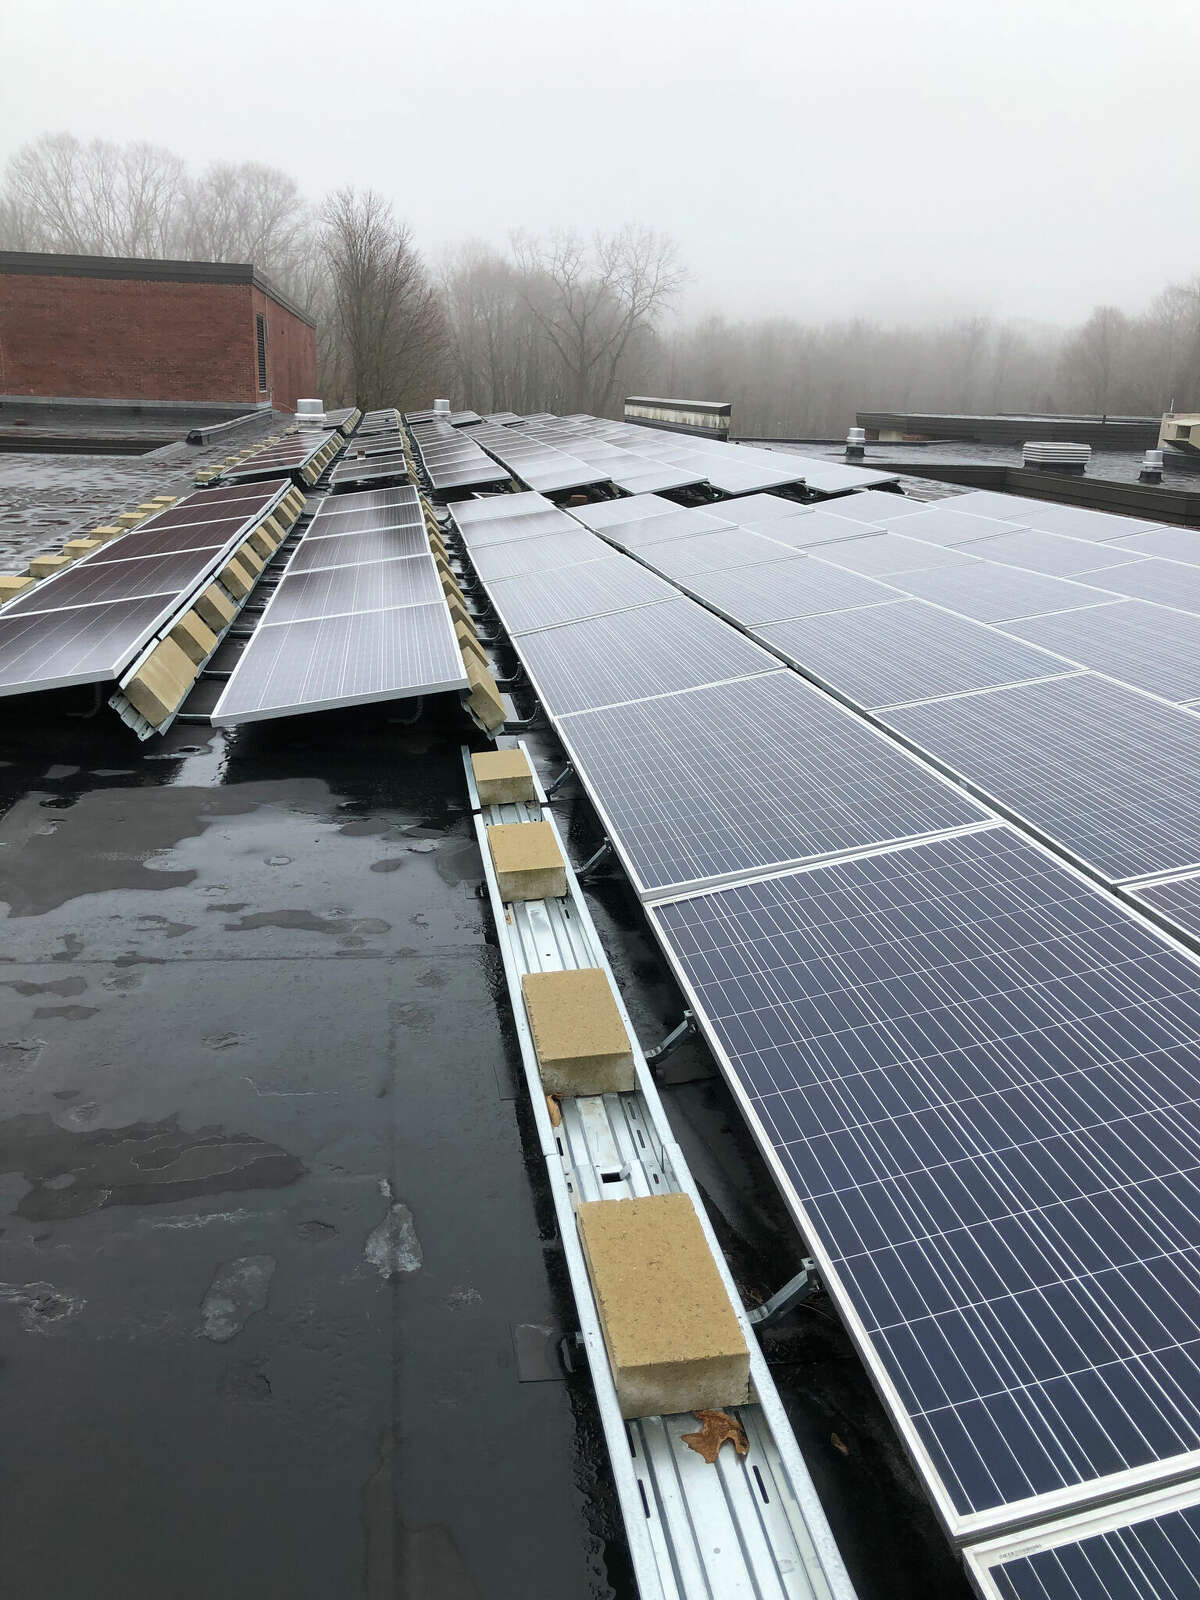 Solar panels on the roof at Barlow Mountain Elementary School in Ridgefield.